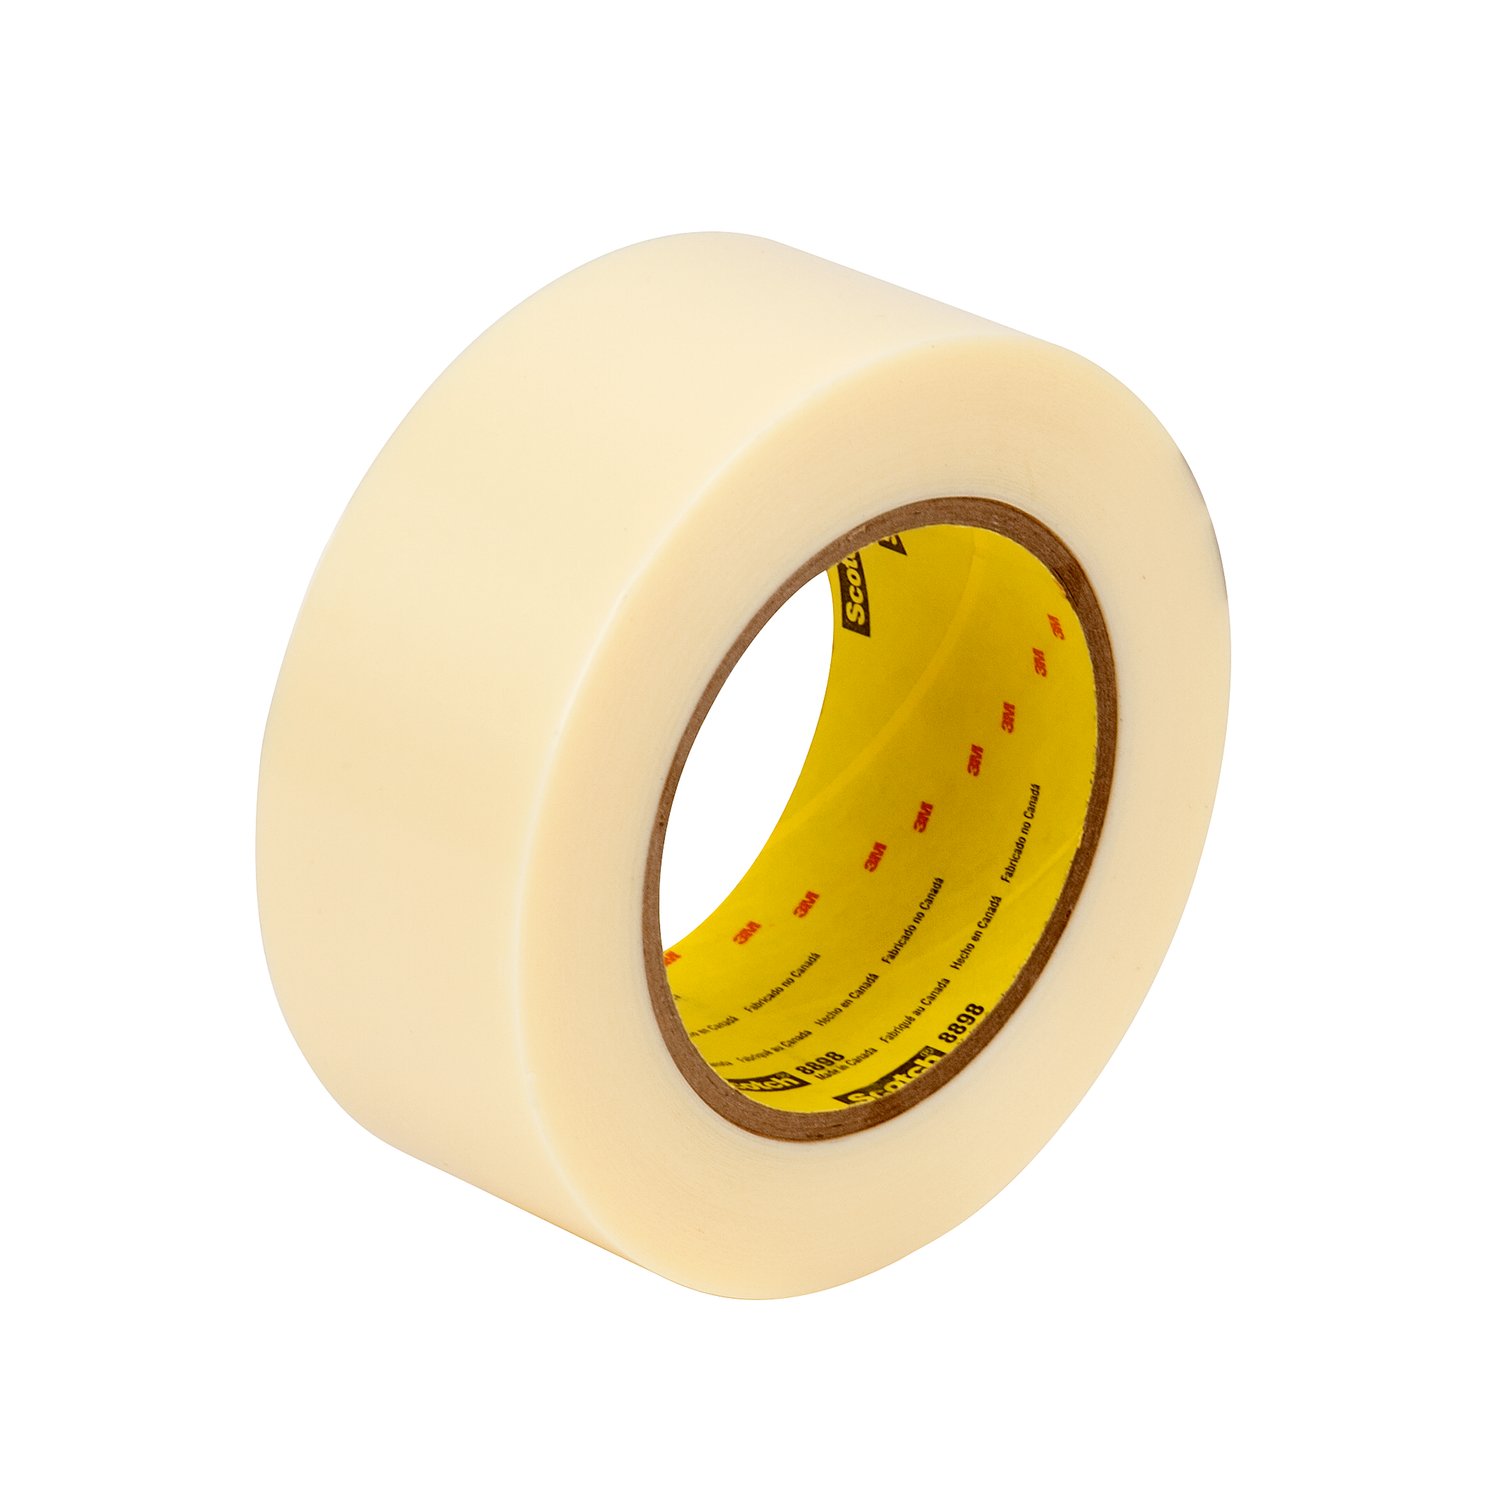 7000123957 - Scotch Strapping Tape 8898, Ivory, 36 mm x 55 m, 4.6 mil, 24 rolls per
case